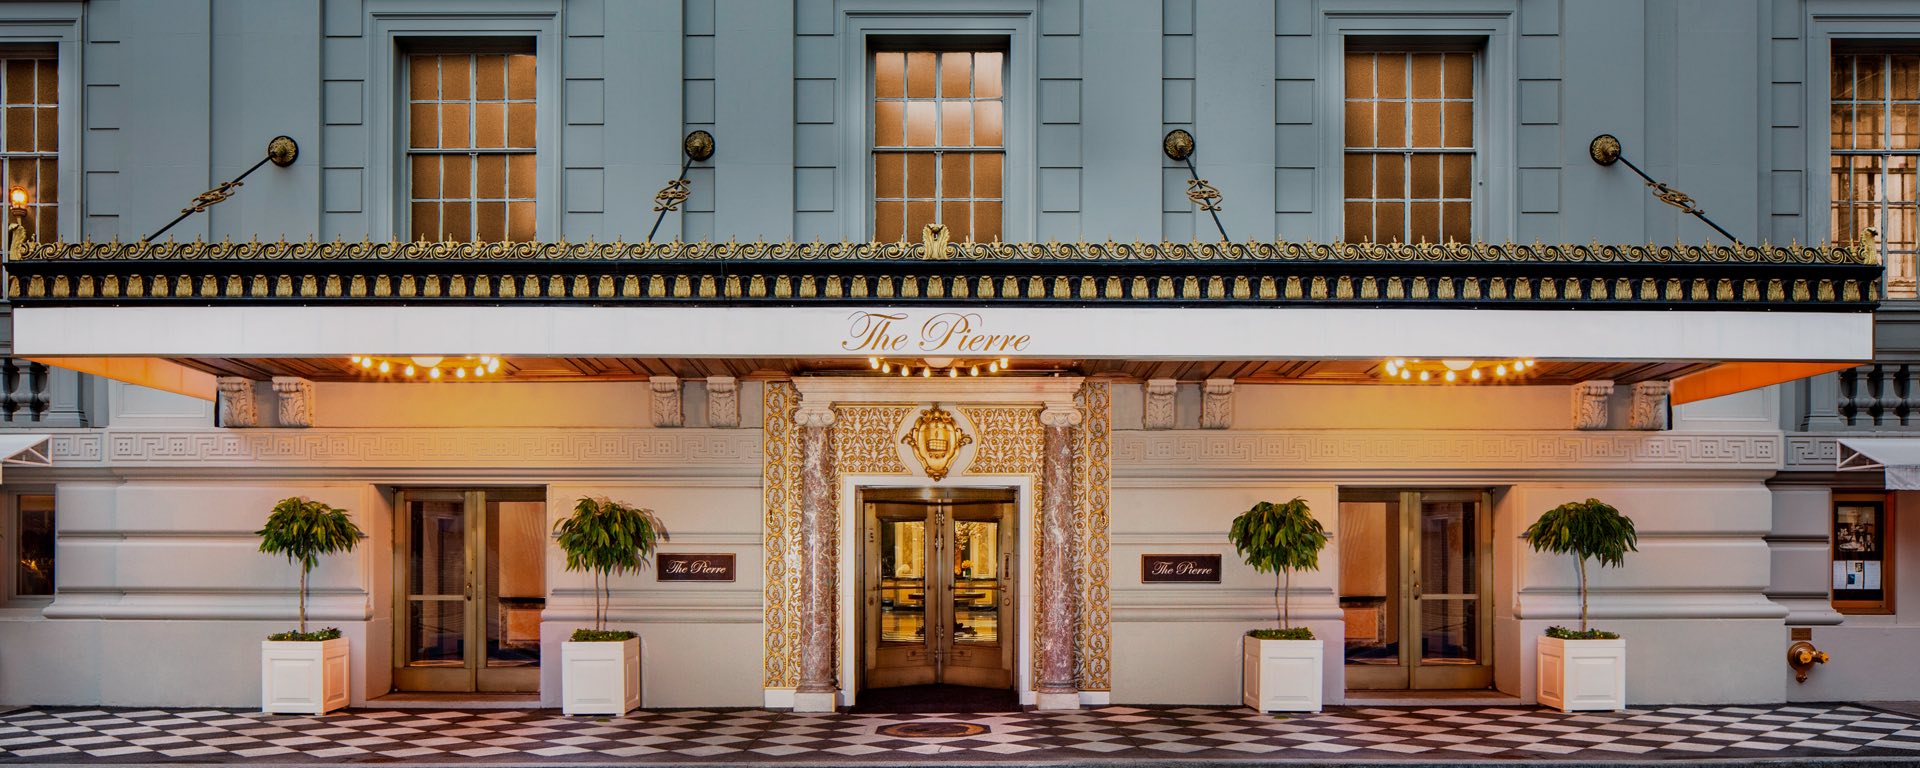 The Pierre NY hotel front